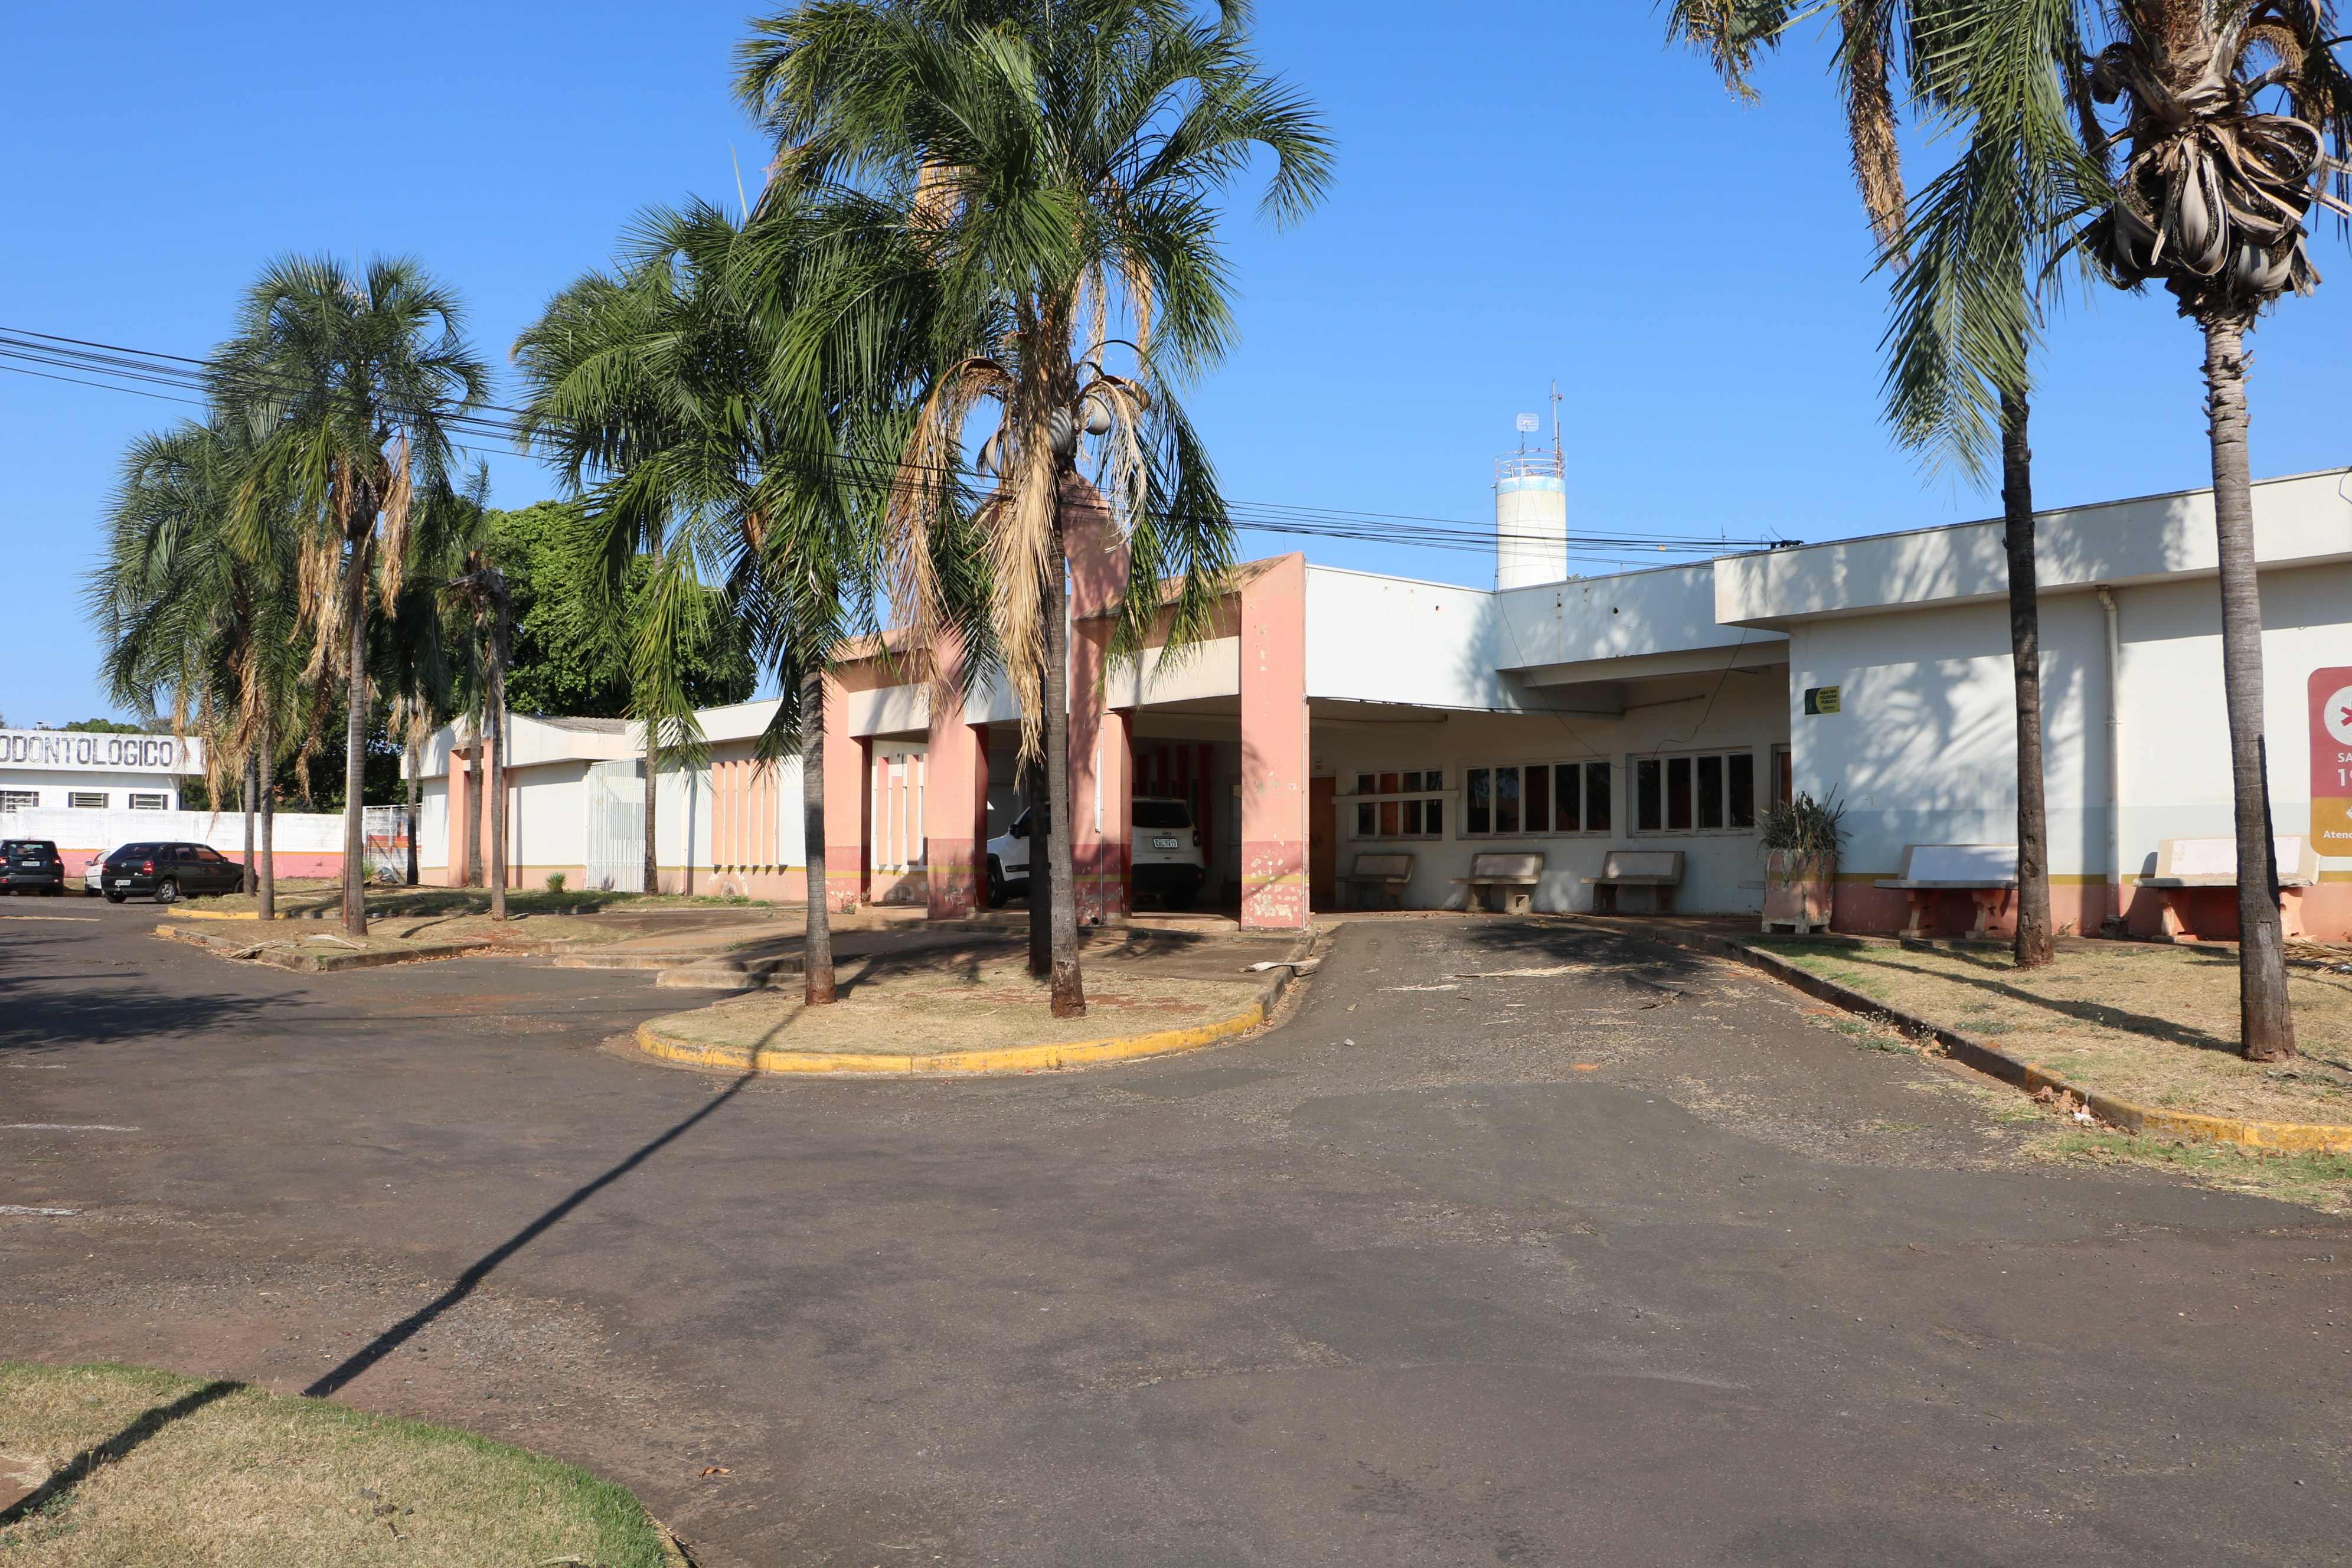 The building of the former municipal emergency room will be revitalized and transformed into a specialty clinic by a partnership between the Centro Universitário Católico Salesiano Auxilium - UniSALESIANO and the City Hall of Araçatuba